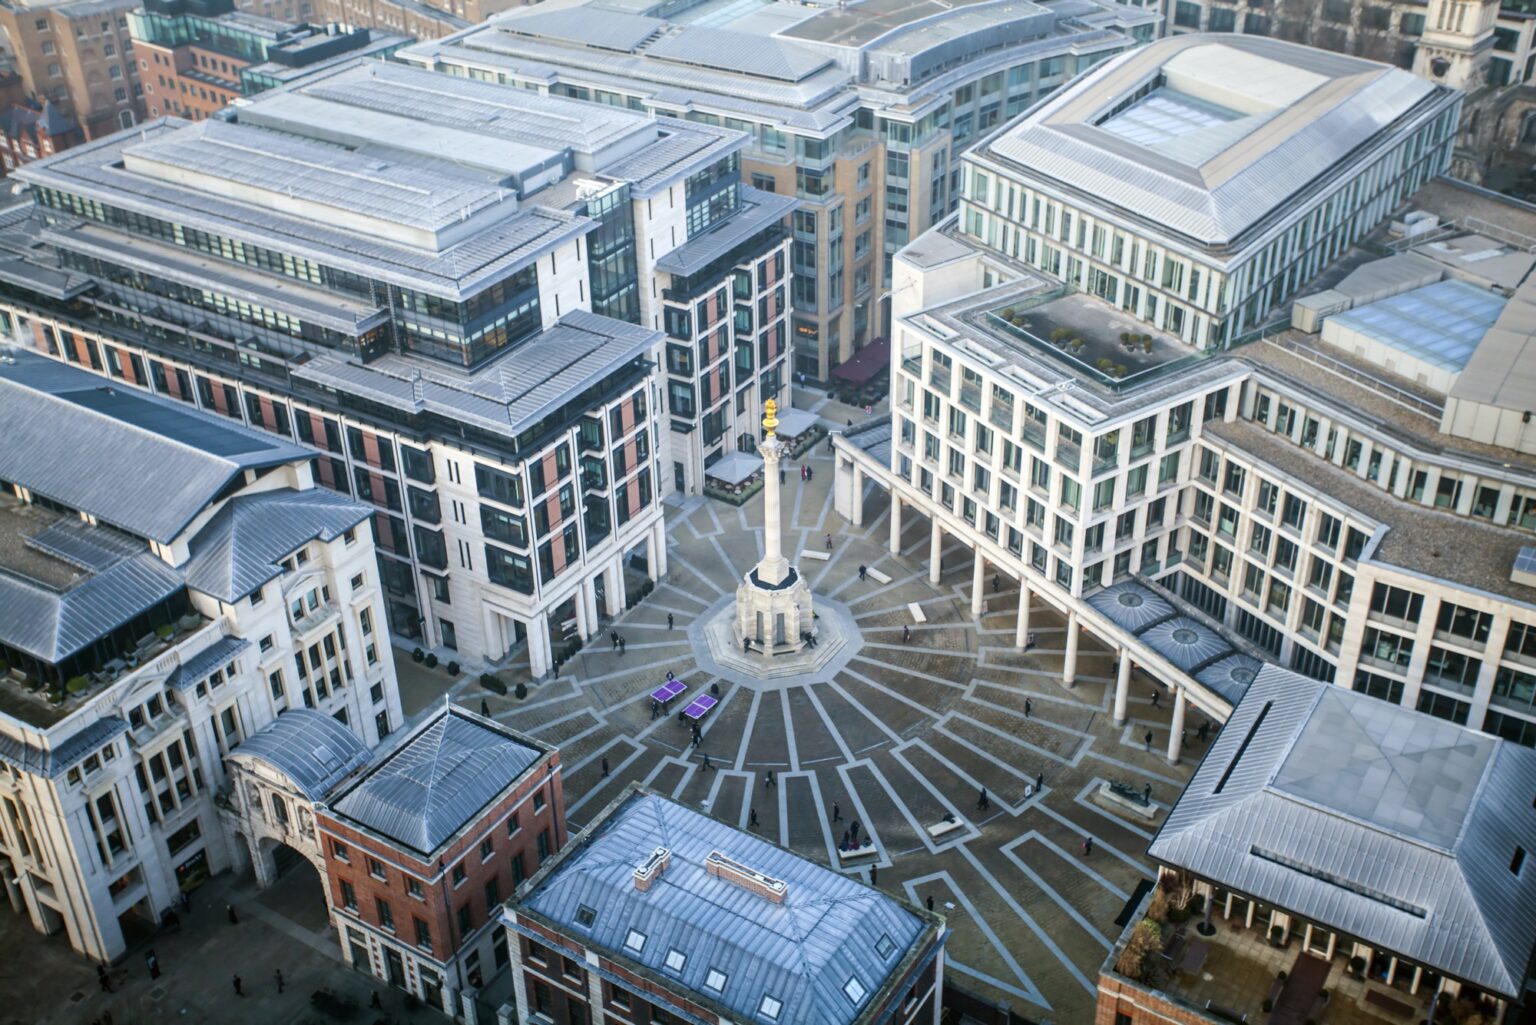 View of Paternoster Square, London, UK